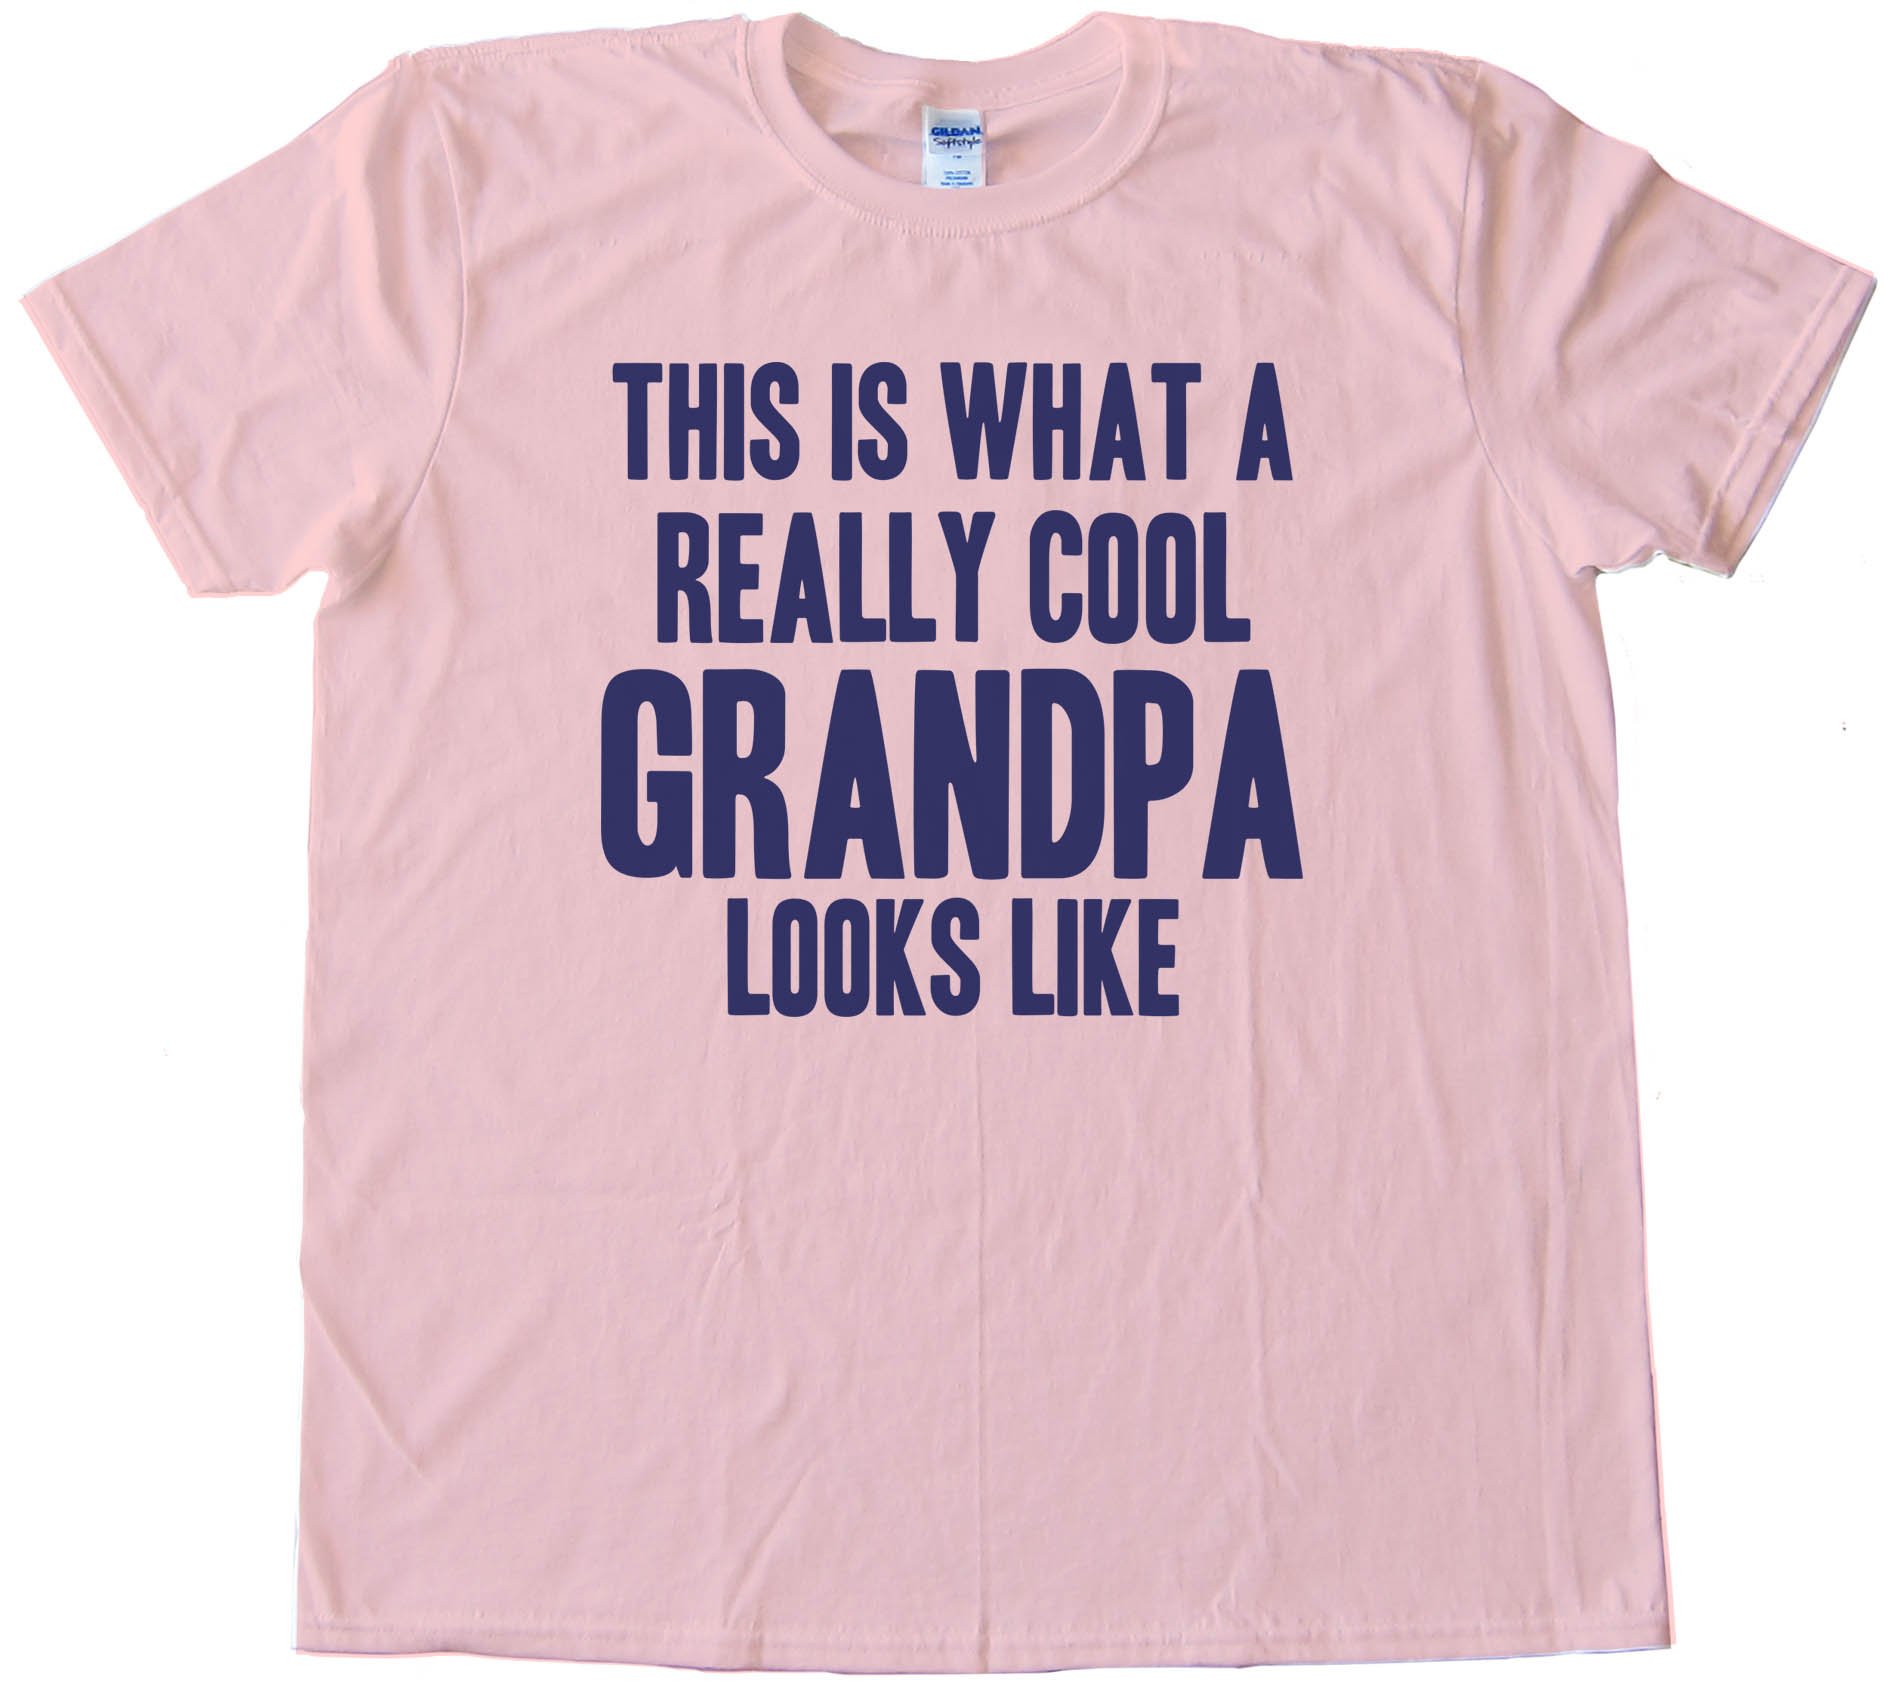 Big Text This Is What A Really Cool Grandpa Looks Like - Tee Shirt